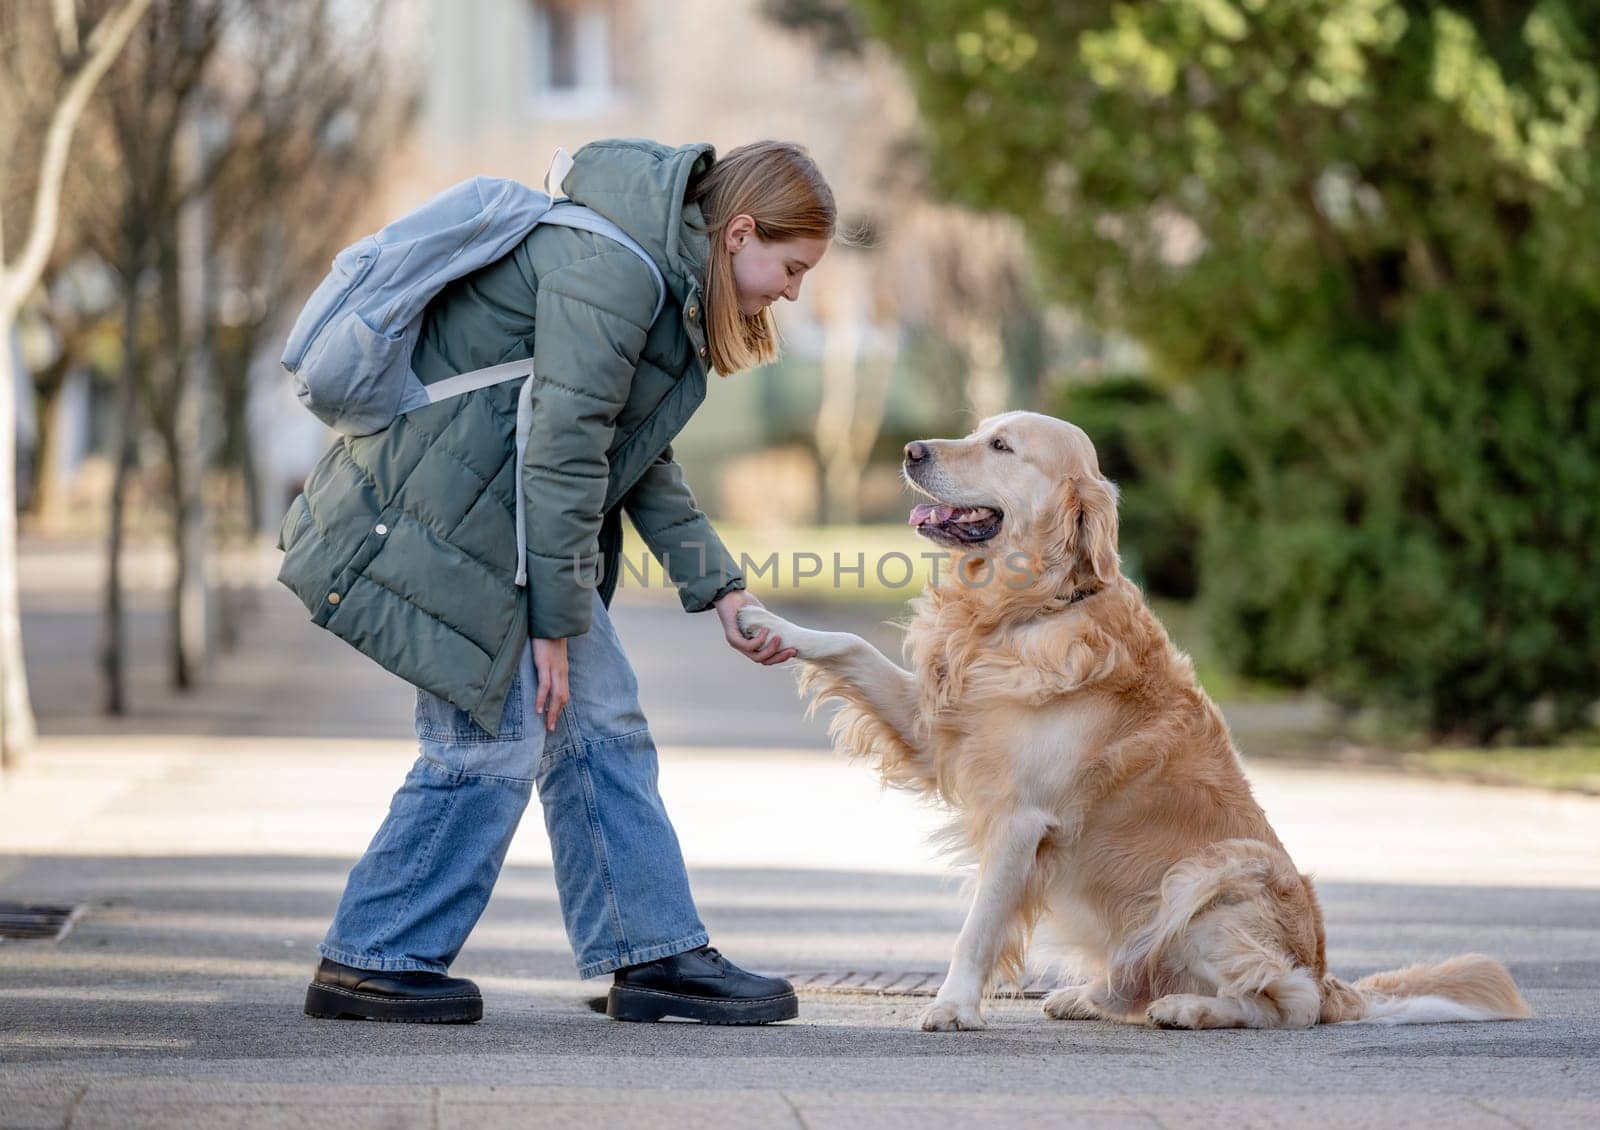 Golden Retriever Gives Paw To Its Young Girl Owner During Winter Walk With Dog